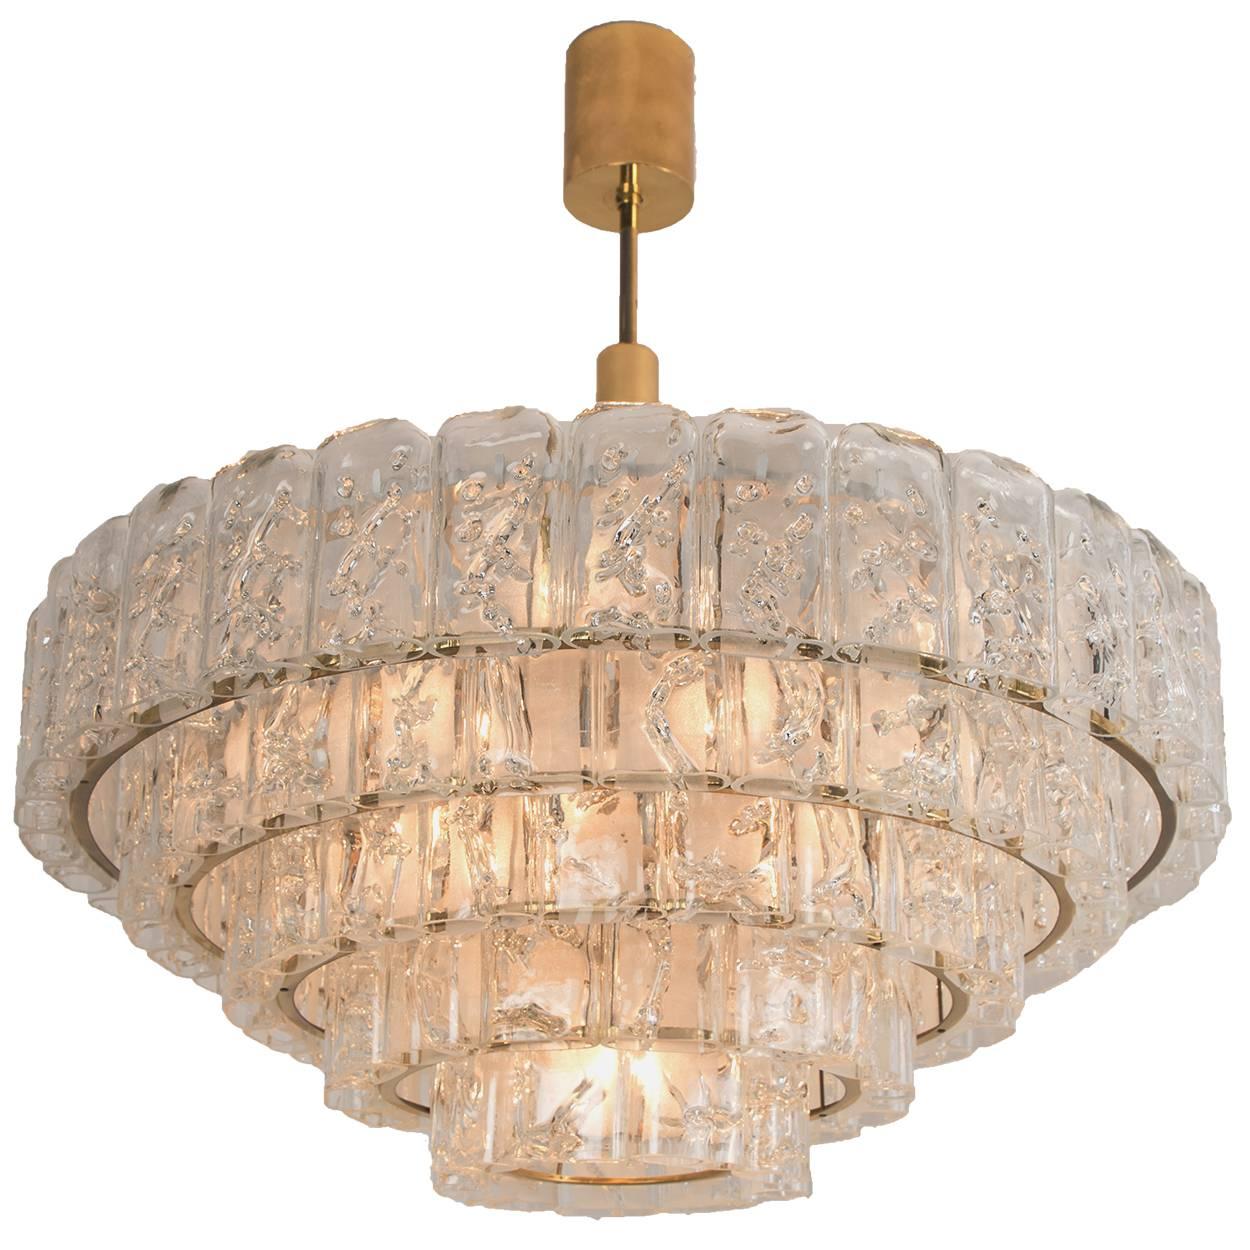 We offer a amazing set of high-end Doria light fixtures. The set is executed to a high standard. Beautiful craftsmanship. The light fixtures not only function as light source but also as a sculptural component. 

The stylish and clean elegance of